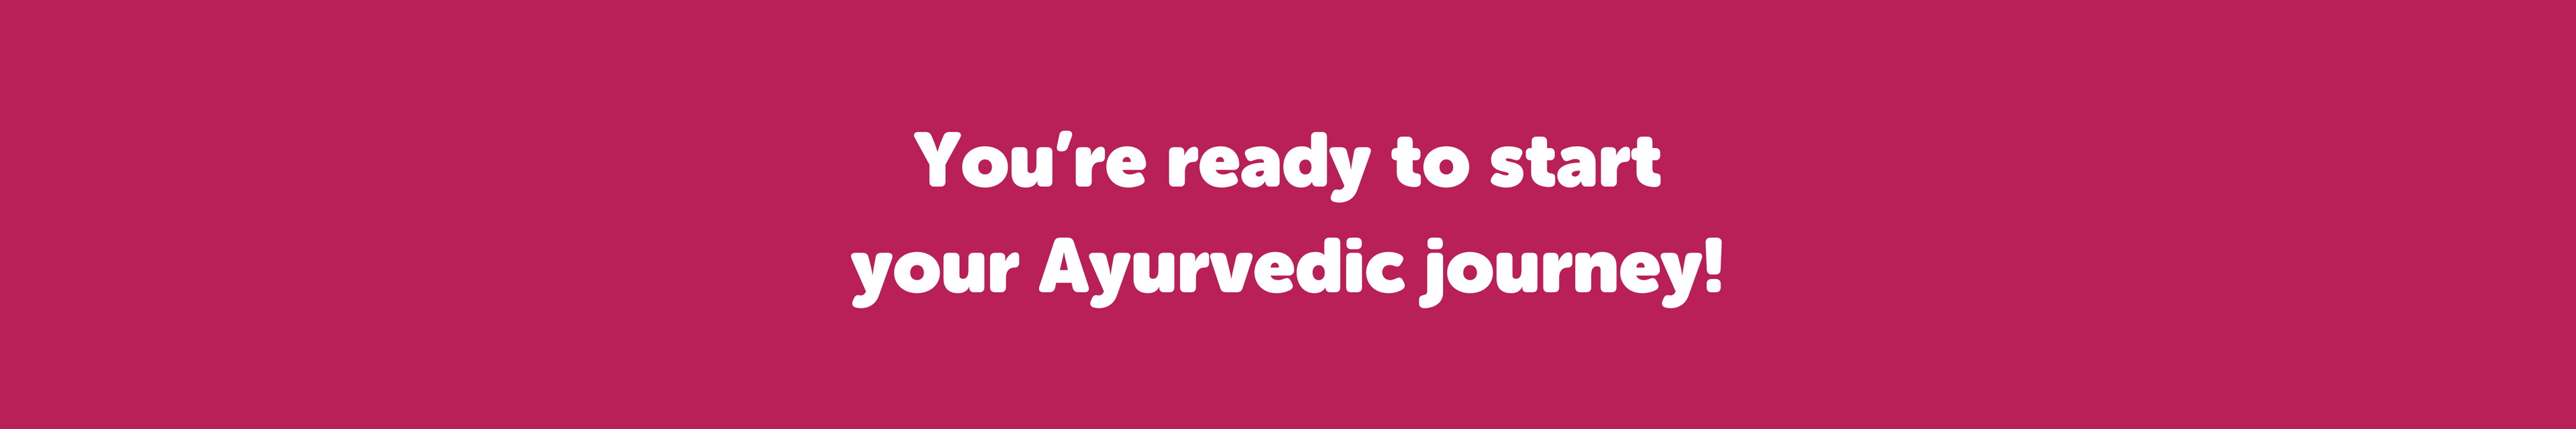 Banner that says you're ready to start your Ayurvedic journey